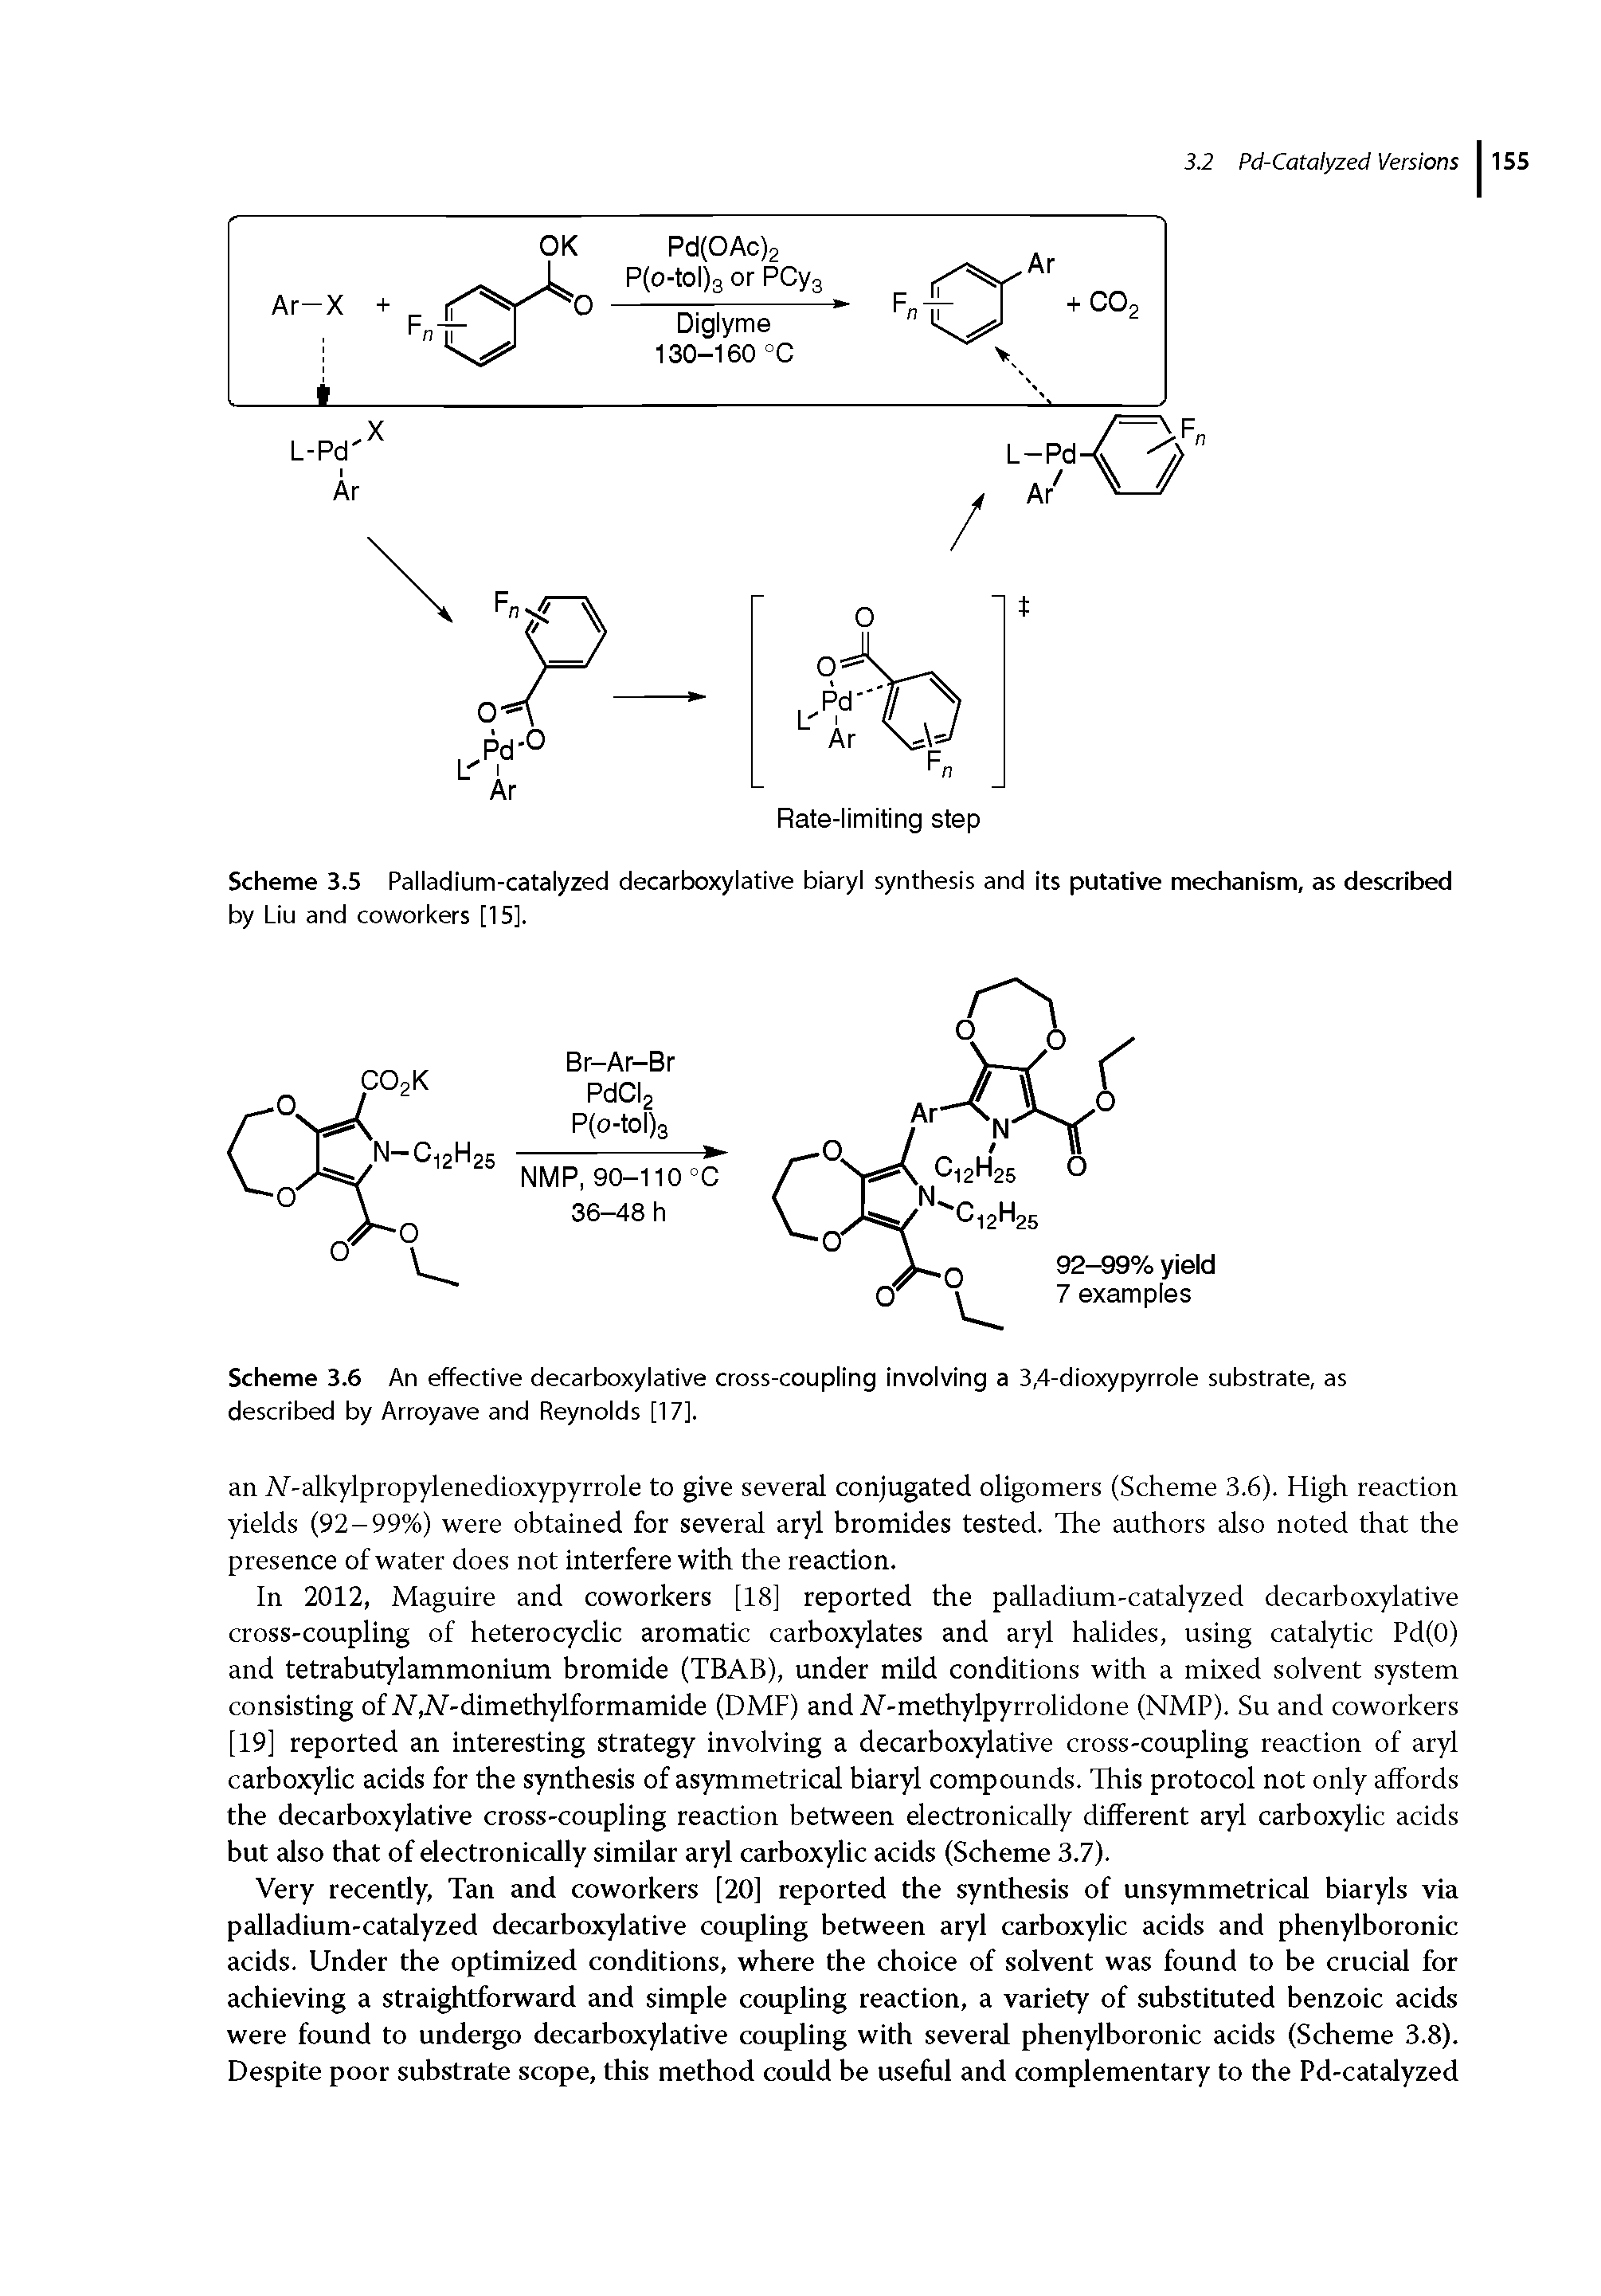 Scheme 3.6 An effective decarboxylative cross-coupling involving a 3,4-dioxypyrrole substrate, as described by Arroyave and Reynolds [17].